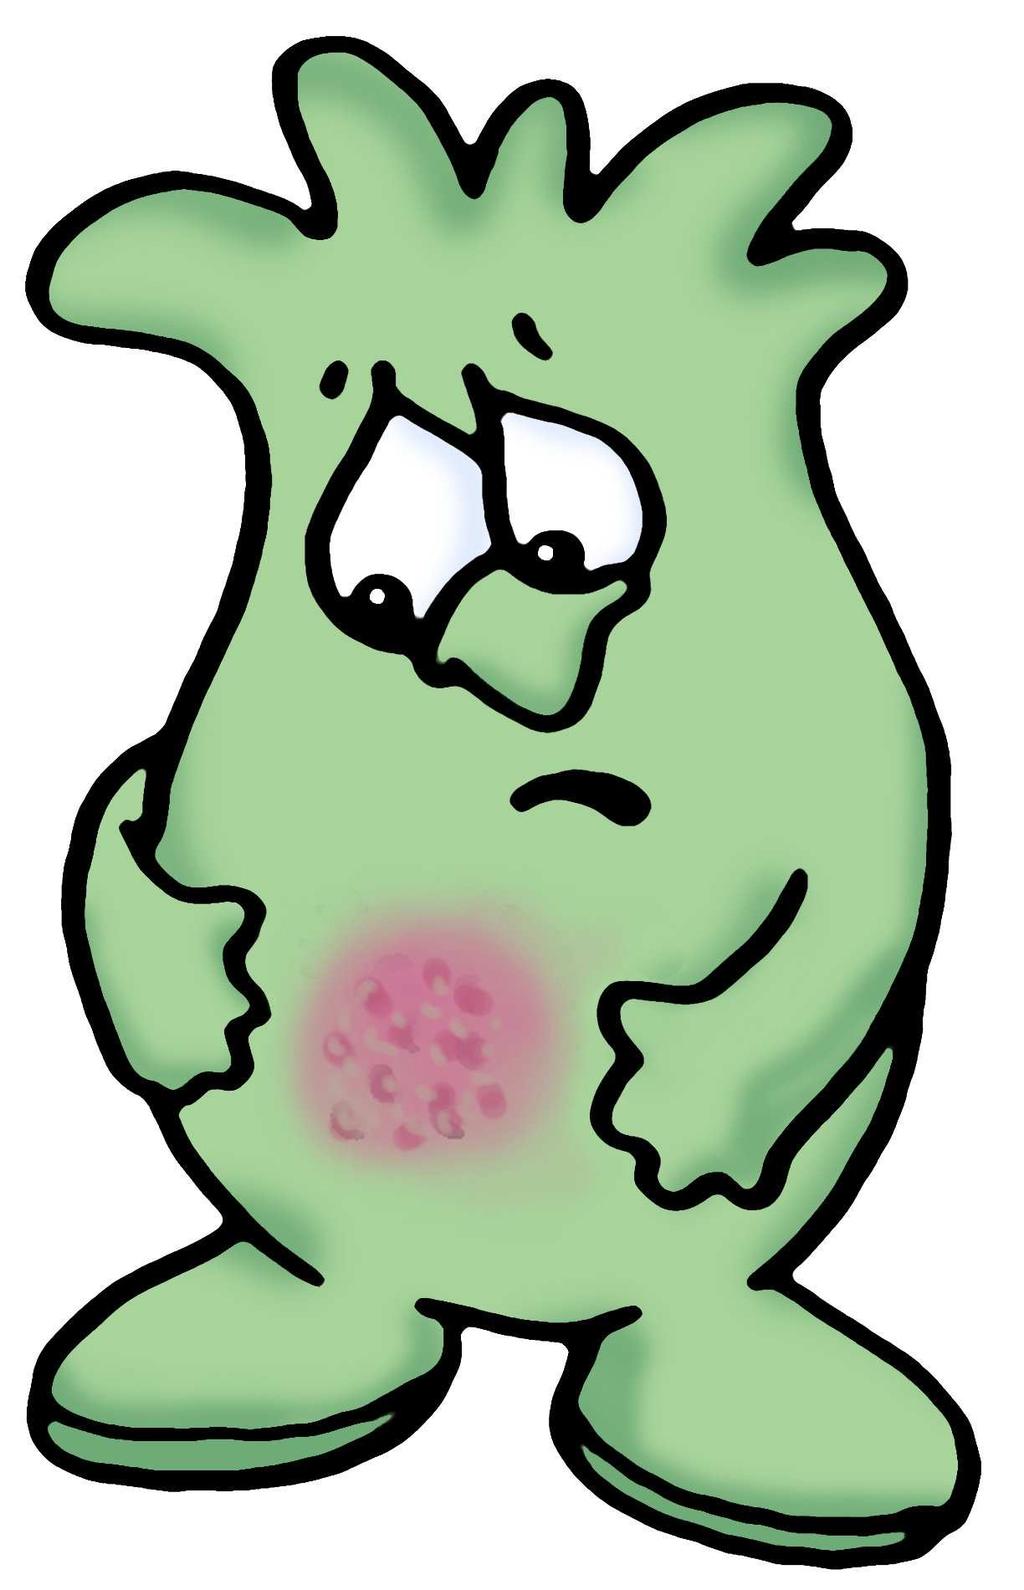 MRSA May appear as pustules or boils which may be red, swollen, painful, or have pus or other drainage Often first look like spider bites or bumps